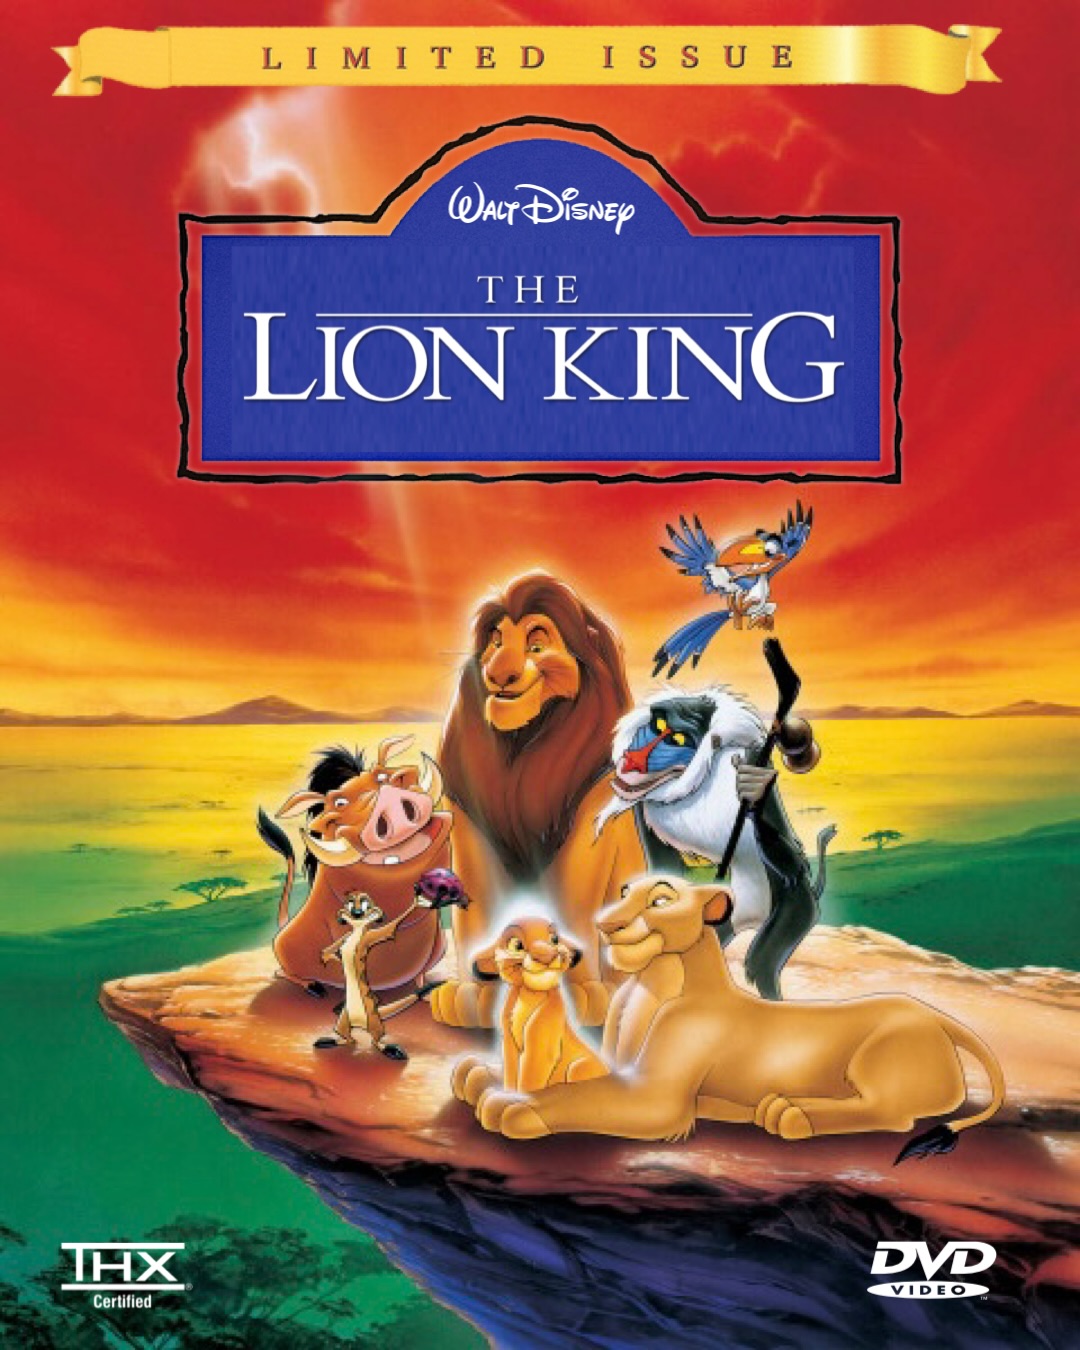 The Lion King DVD 1998 | Vhs and DVD Credits Wiki | Fandom